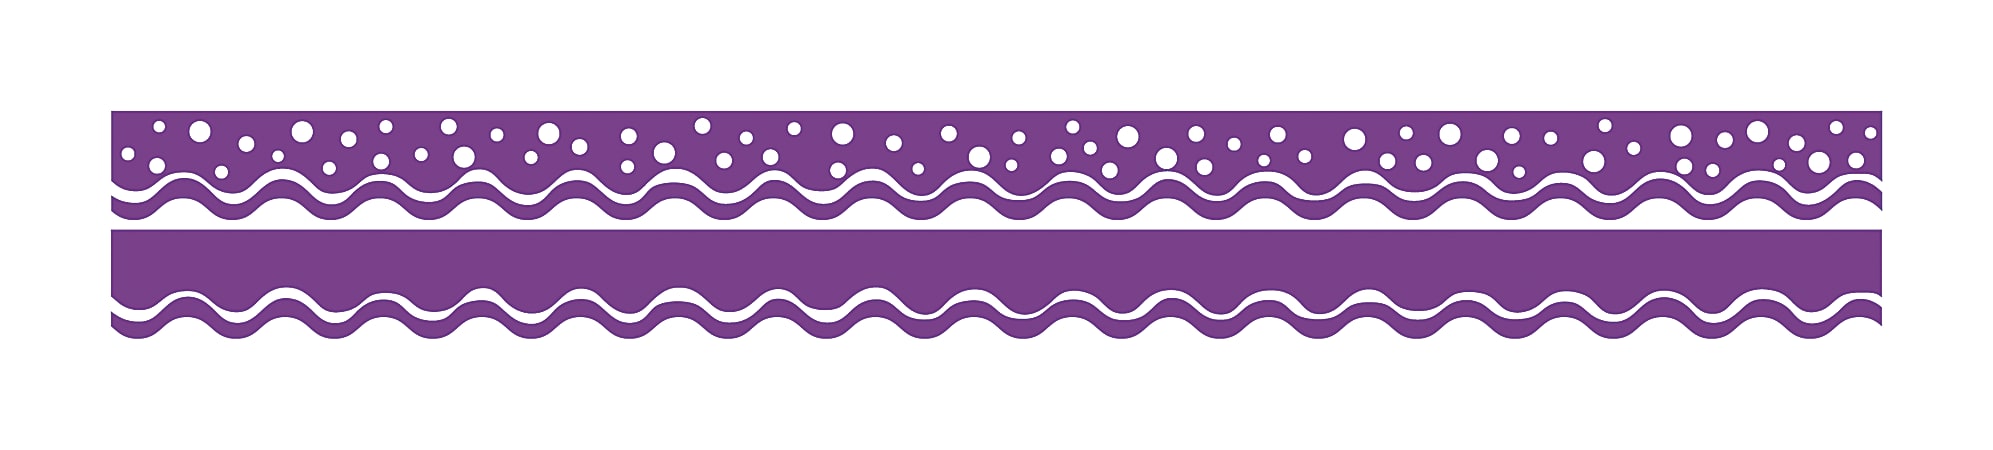 Barker Creek Scalloped-Edge Double-Sided Borders, 2 1/4" x 36", Grape, Pack Of 13